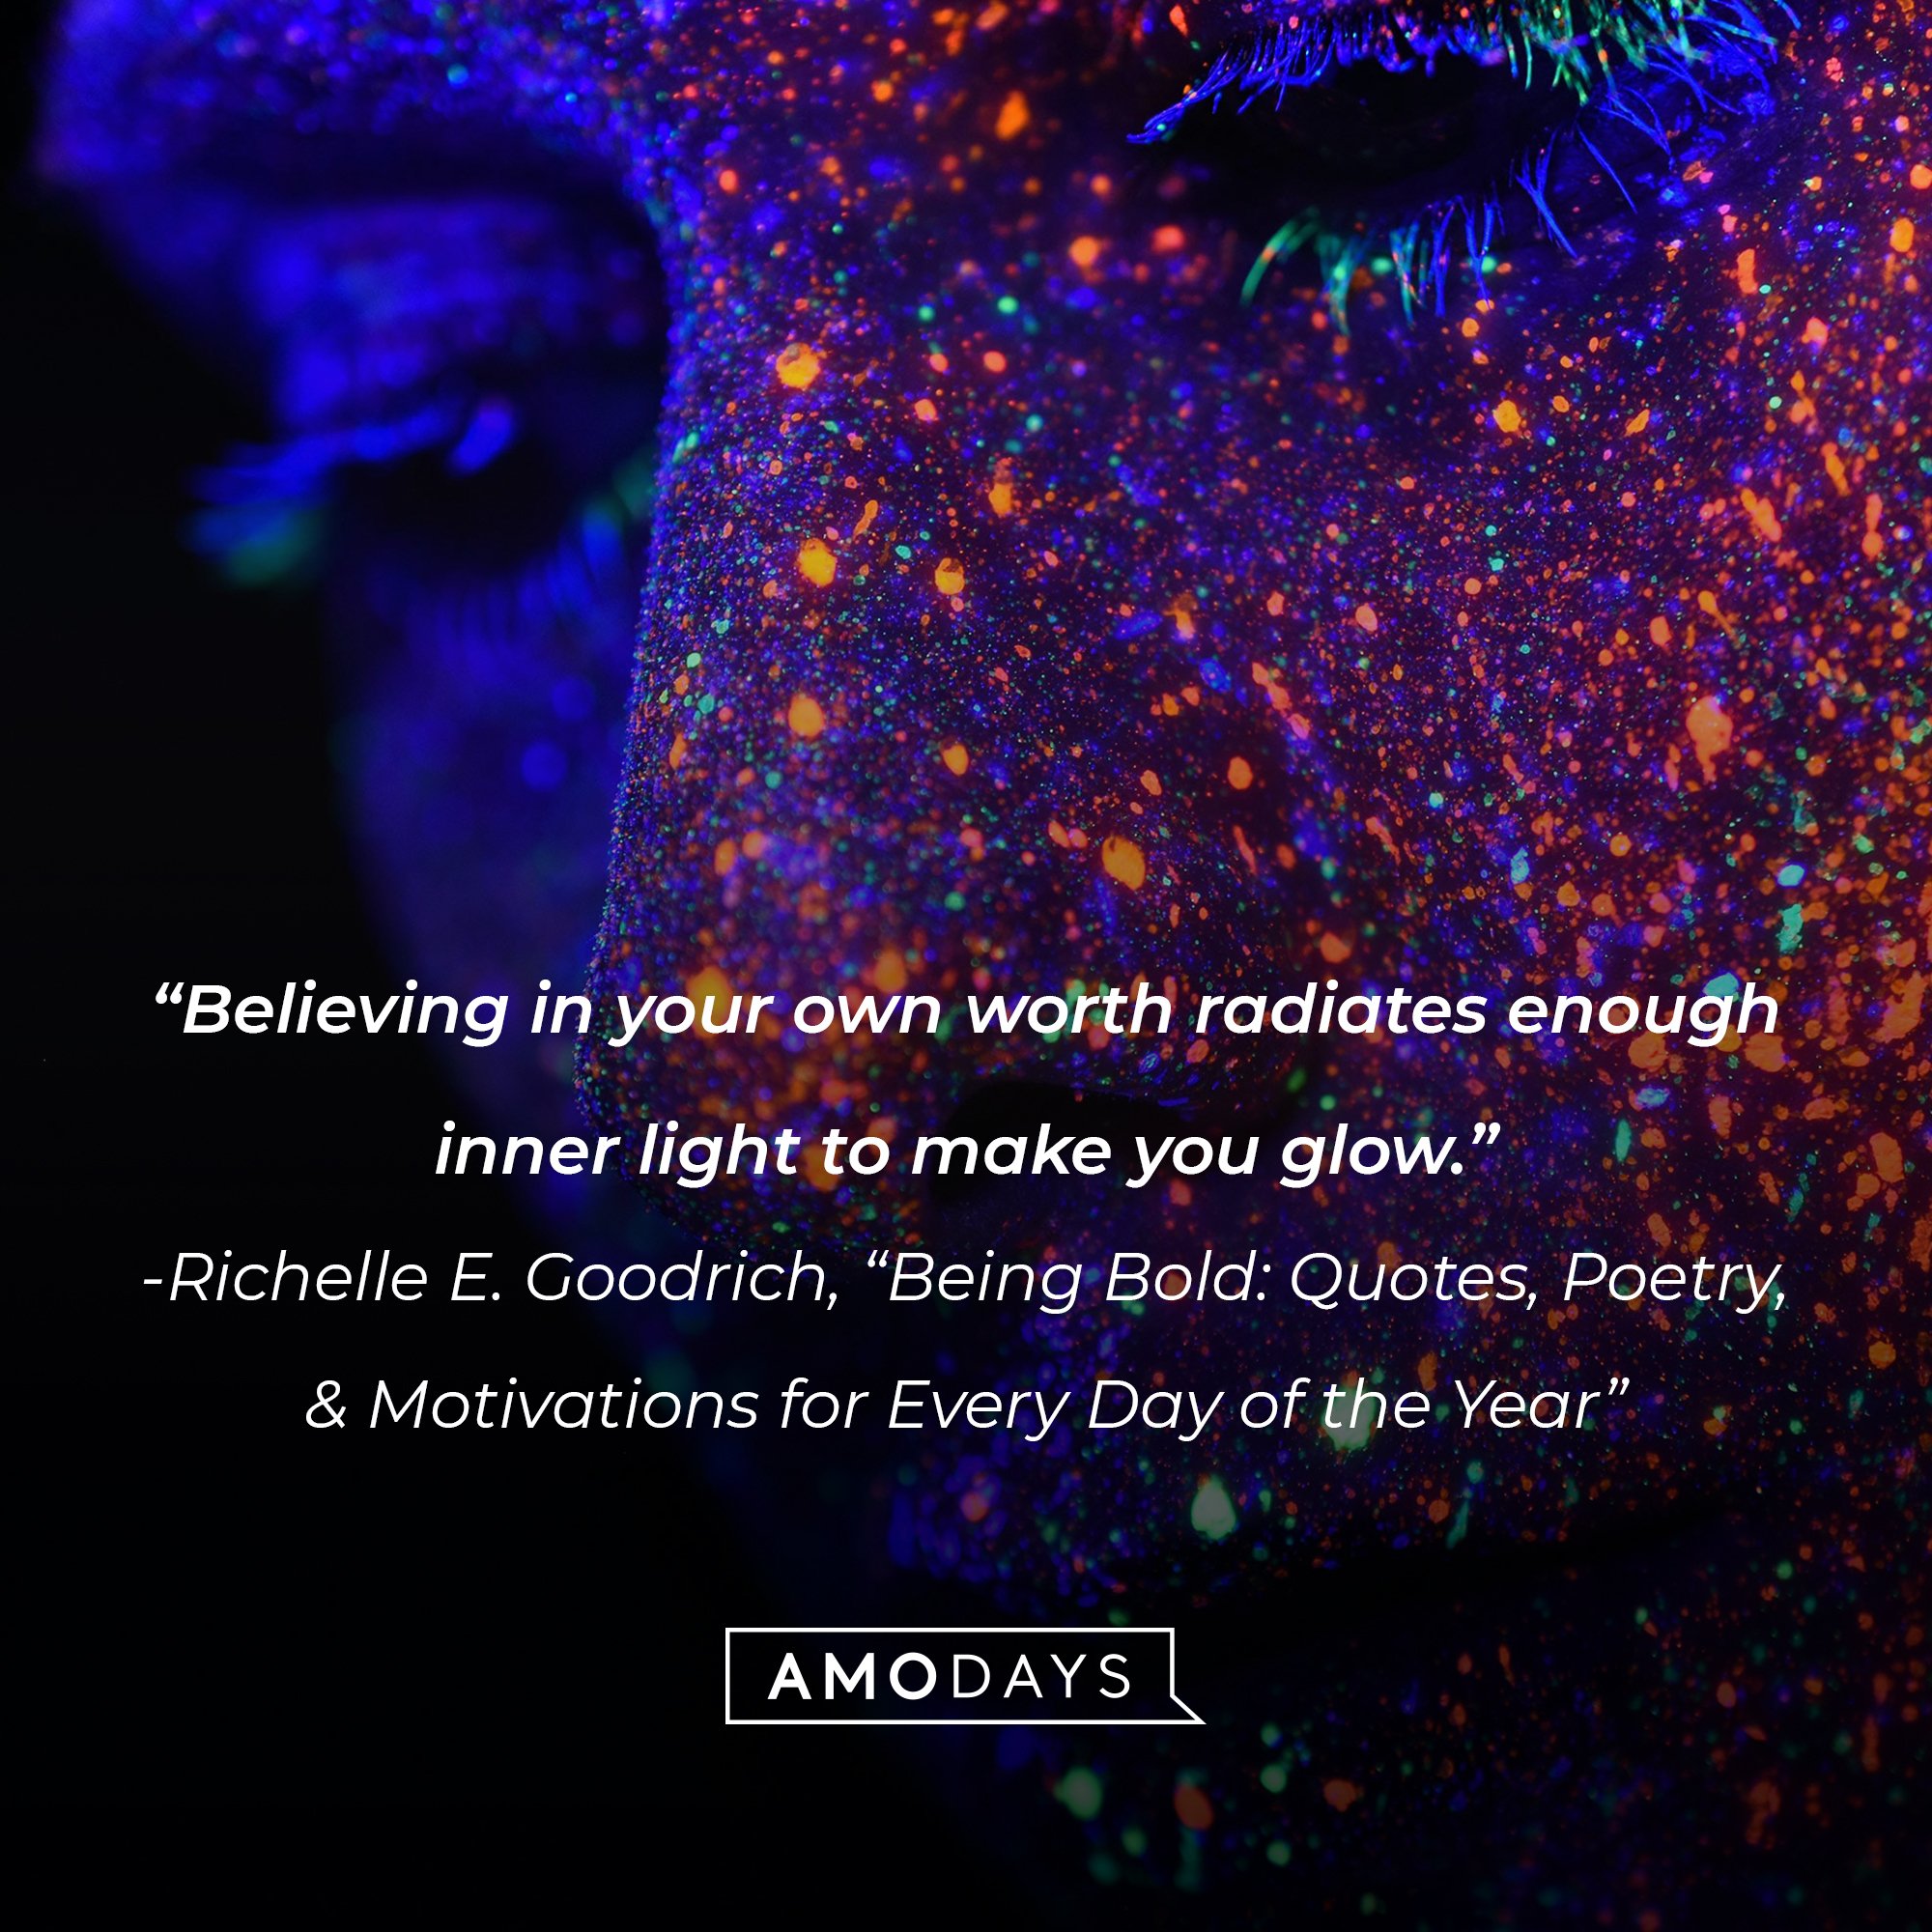 "Being Bold: Quotes, Poetry, & Motivations for Every Day of the Year" by Richelle E. Goodrich's quote: "Believing in your own worth radiates enough inner light to make you glow." | Image: AmoDays